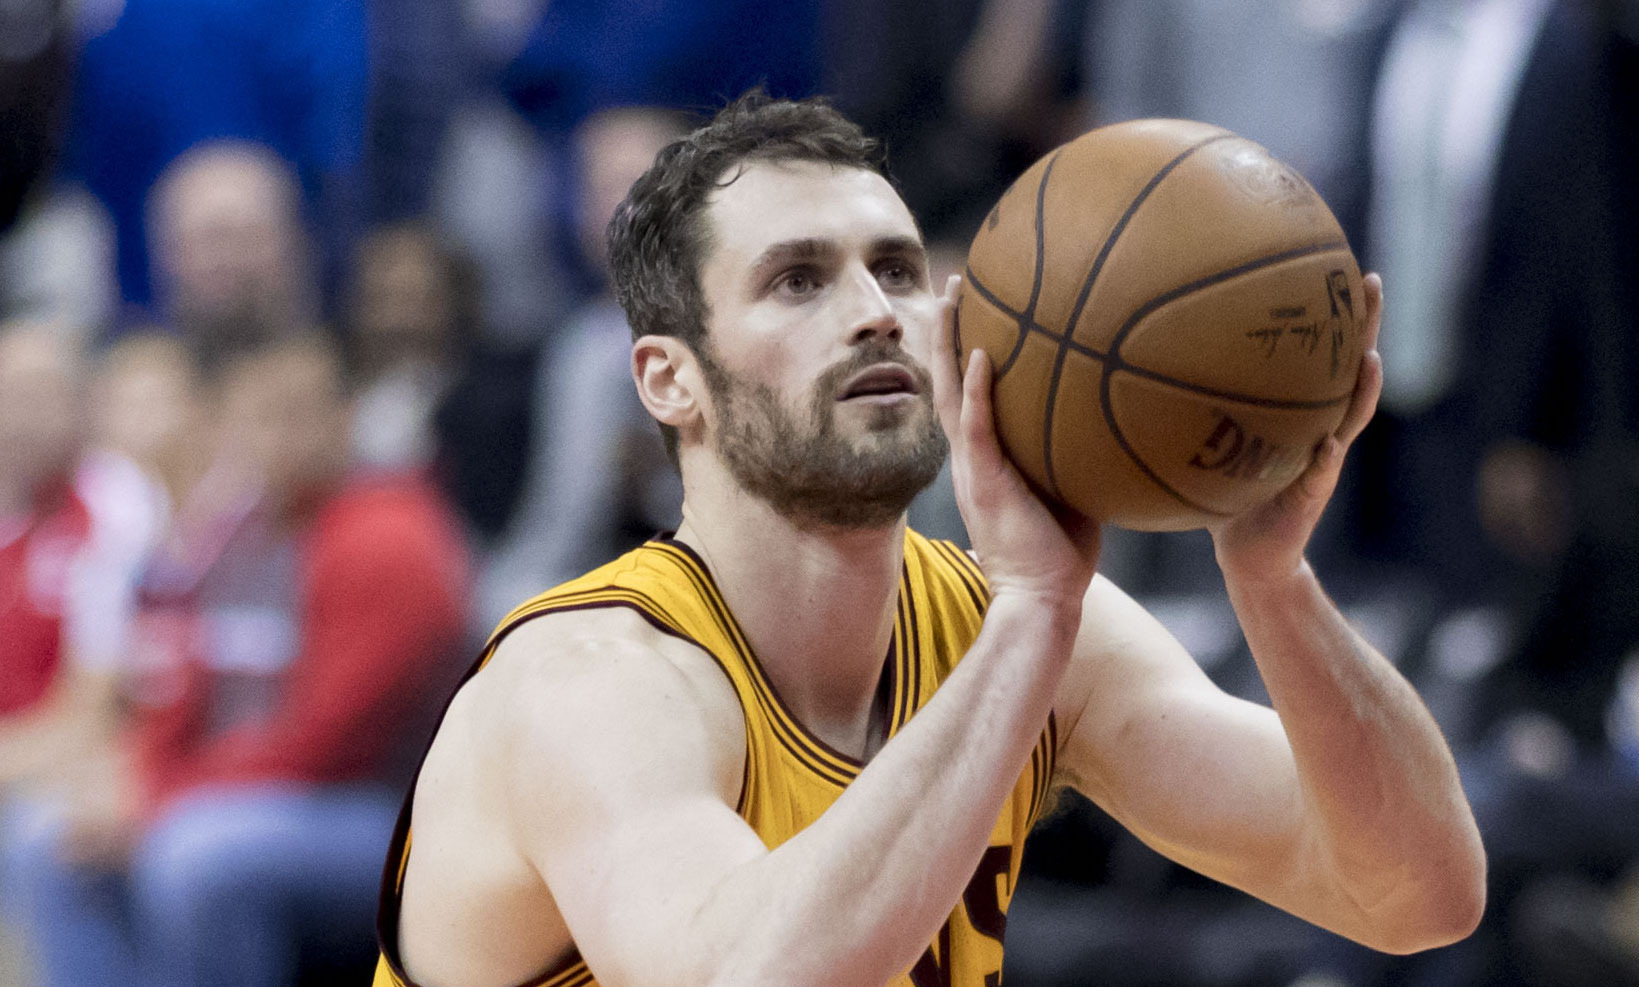 5 Fun Facts About Kevin Love